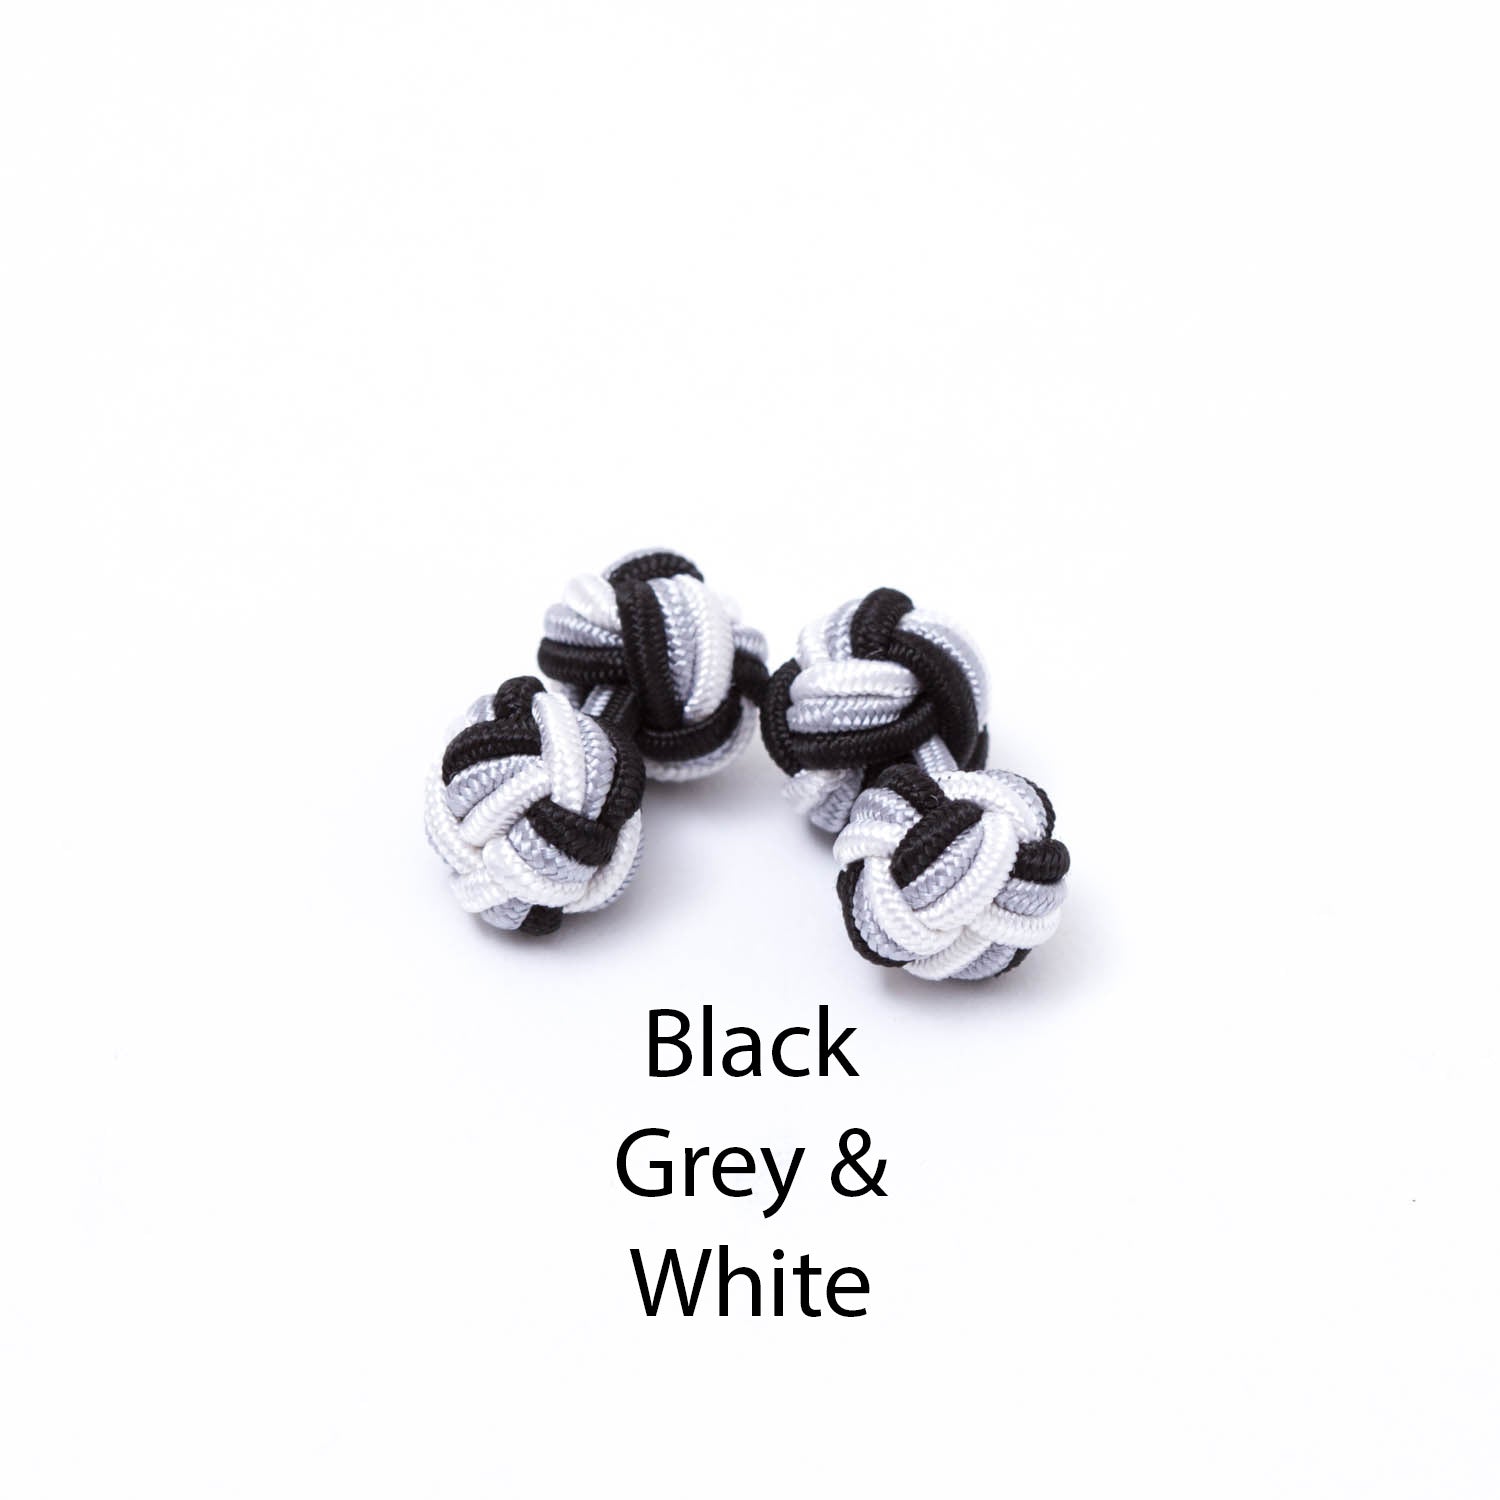 Black and grey Tri-Colored Knot Cufflinks from KirbyAllison.com.